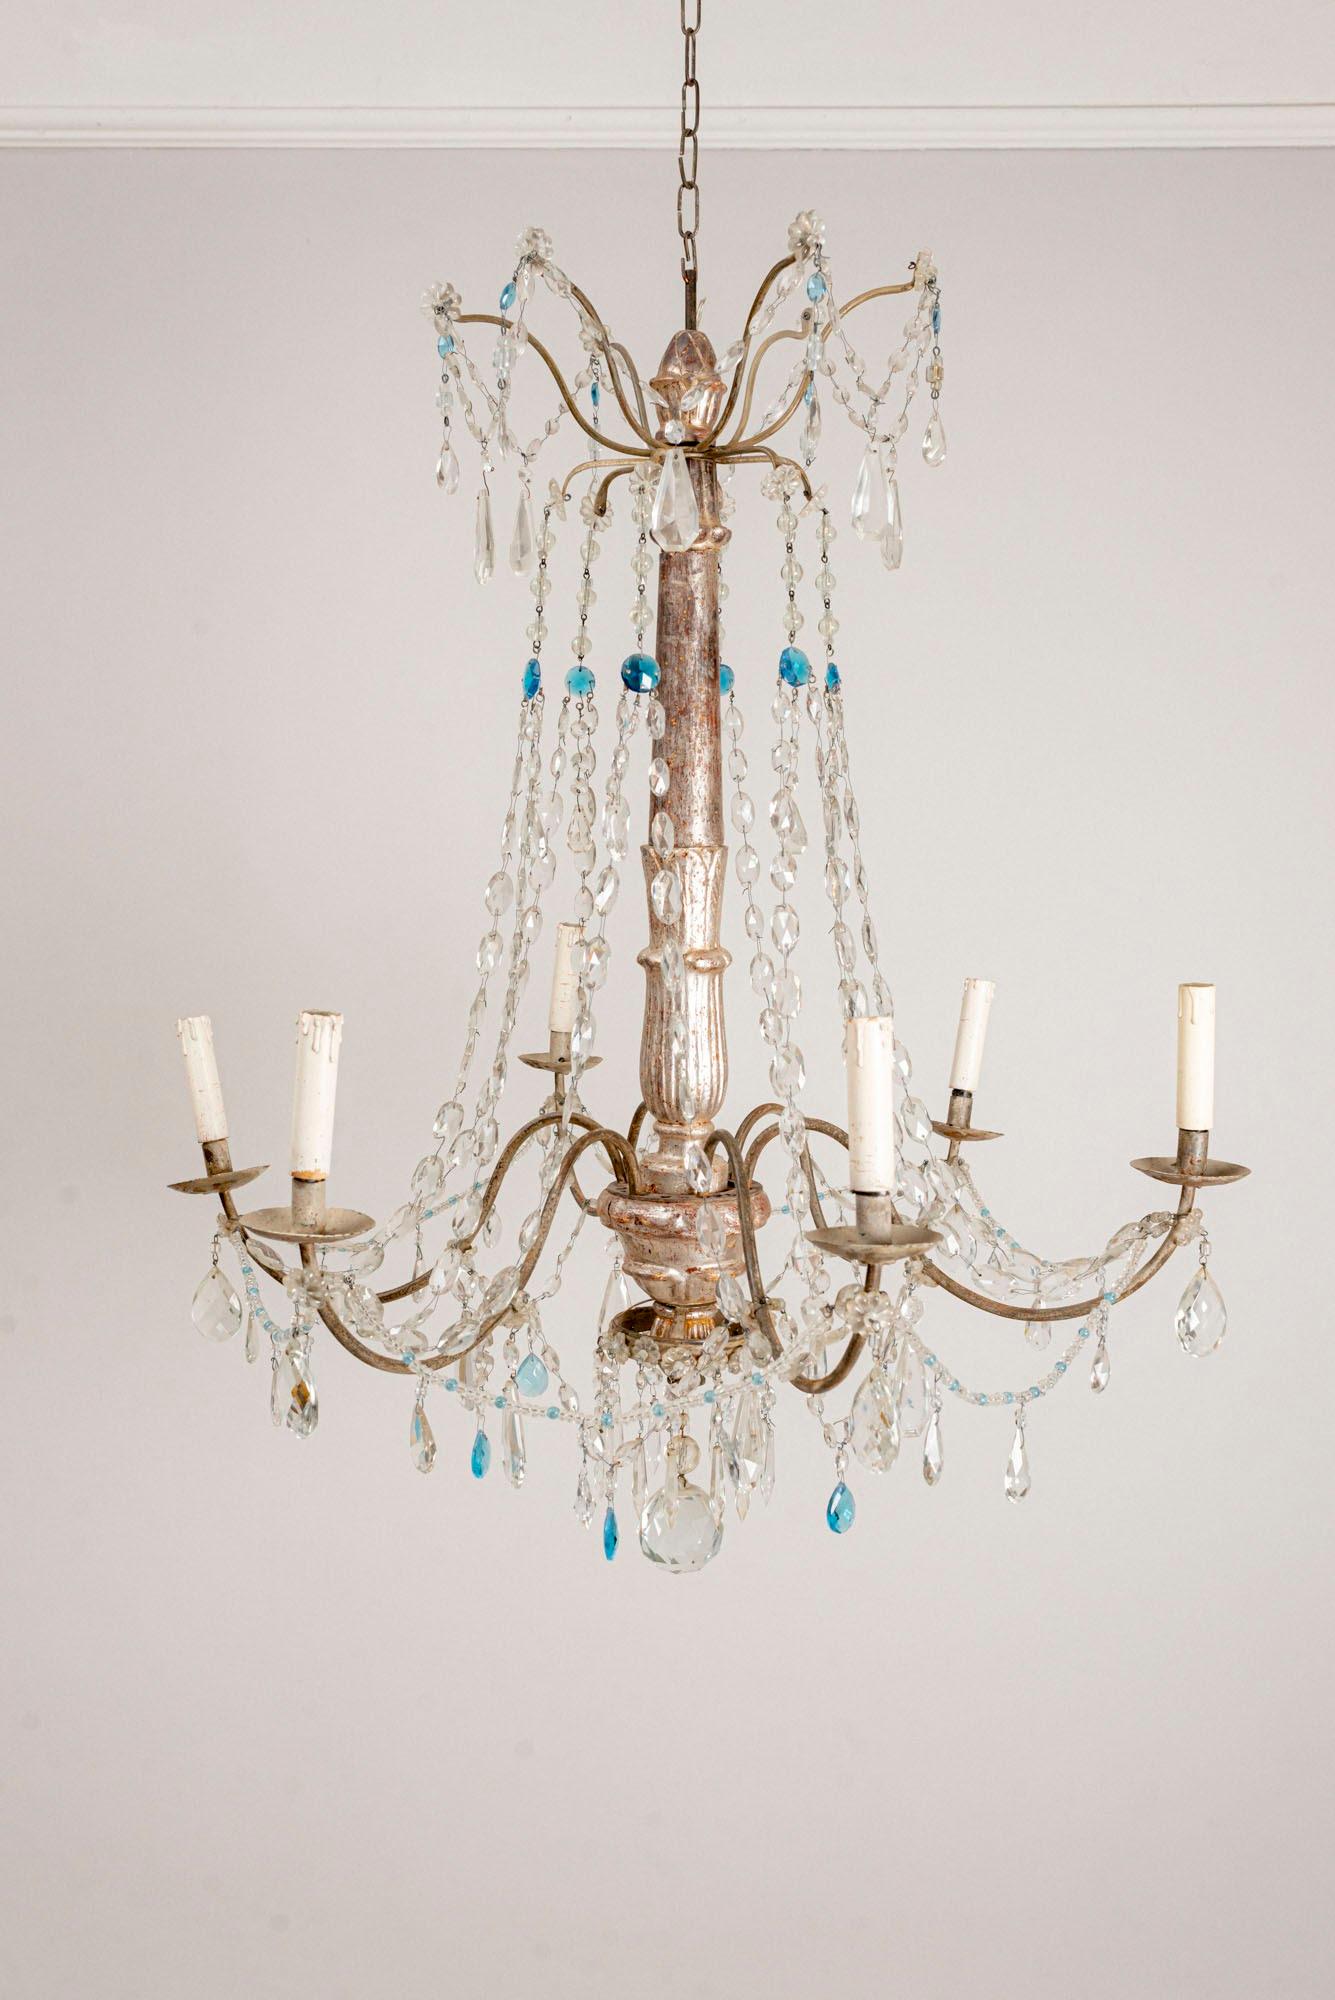 Early circa 19th century Italian chandelier with a silver gilt carved wood central column. 
This charming chandelier has six metal arms with swags of clear and occasional blue glass drops. 
It dates to circa 1820s and is currently unwired but has